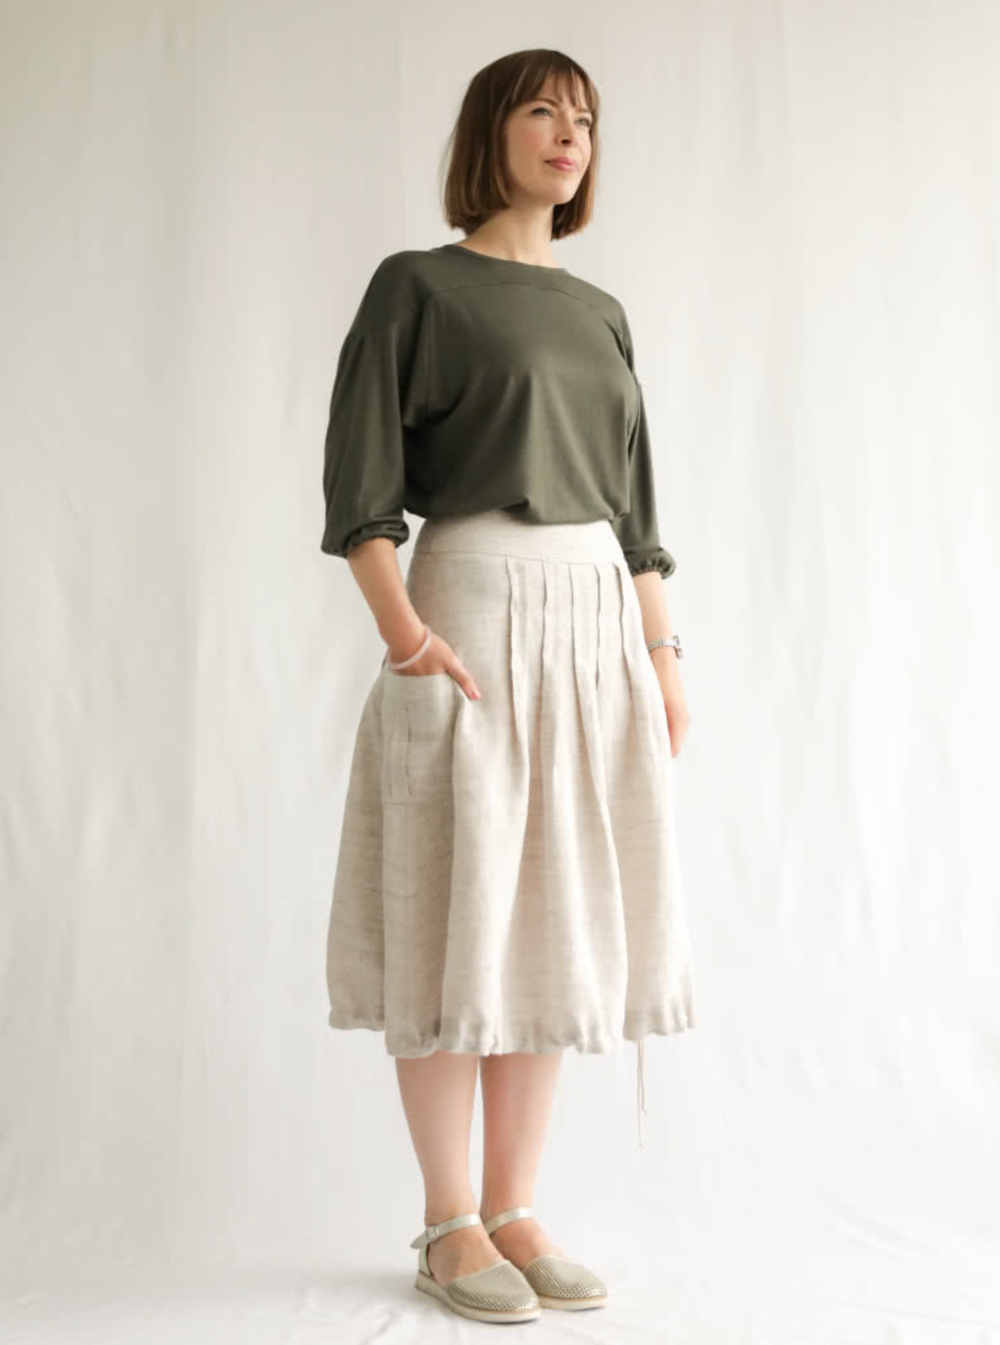 Woman wearing the Richmond Utility Skirt sewing pattern from Style Arc on The Fold Line. A skirt pattern made in washed linen, poplin or crepe fabrics, featuring front and back topstitched box pleats, pockets with centre box pleat, side seam invisible zip